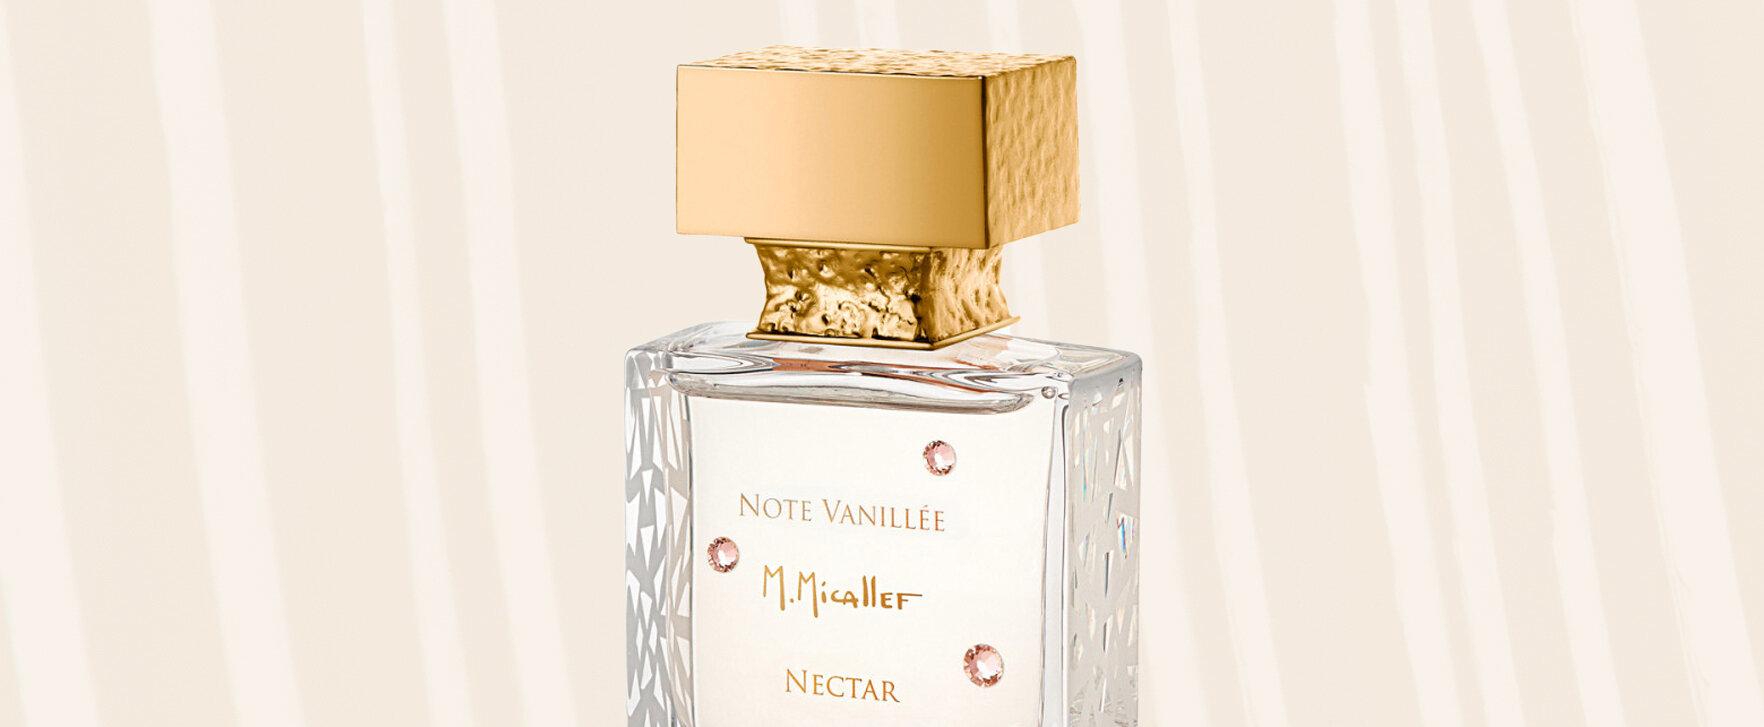 “Note Vanillée Nectar” - M. Micallef Launches New Women’s Fragrance With Intense Vanilla Notes